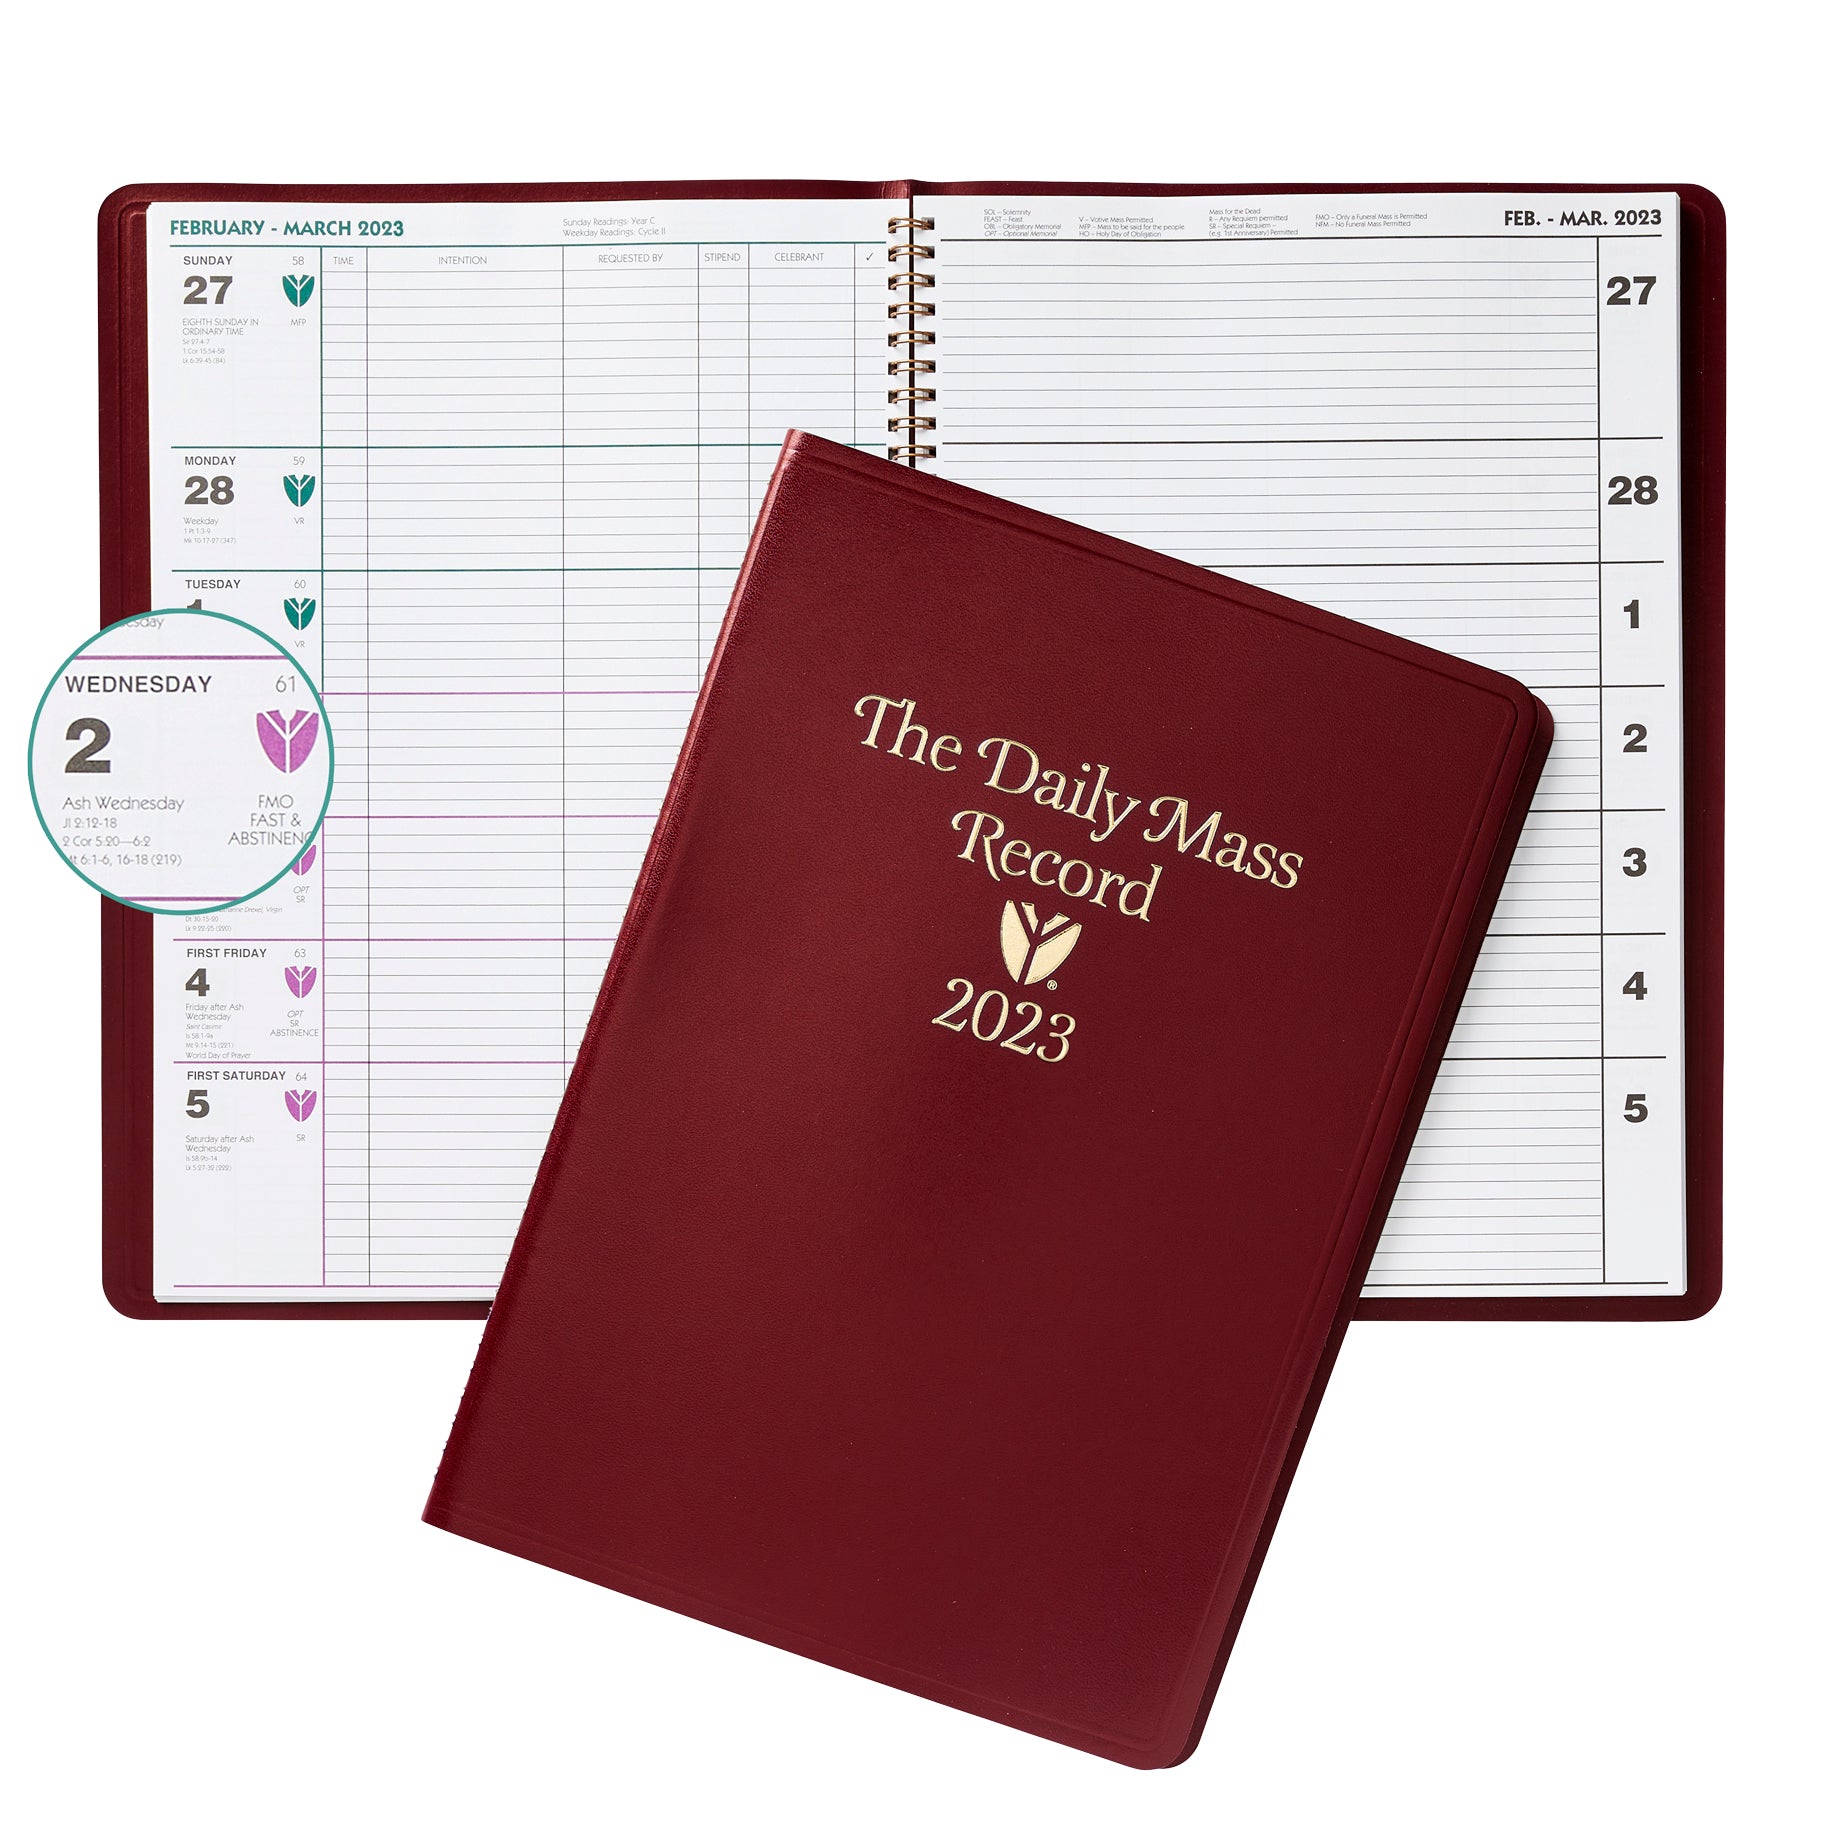 The Daily Mass Record Book